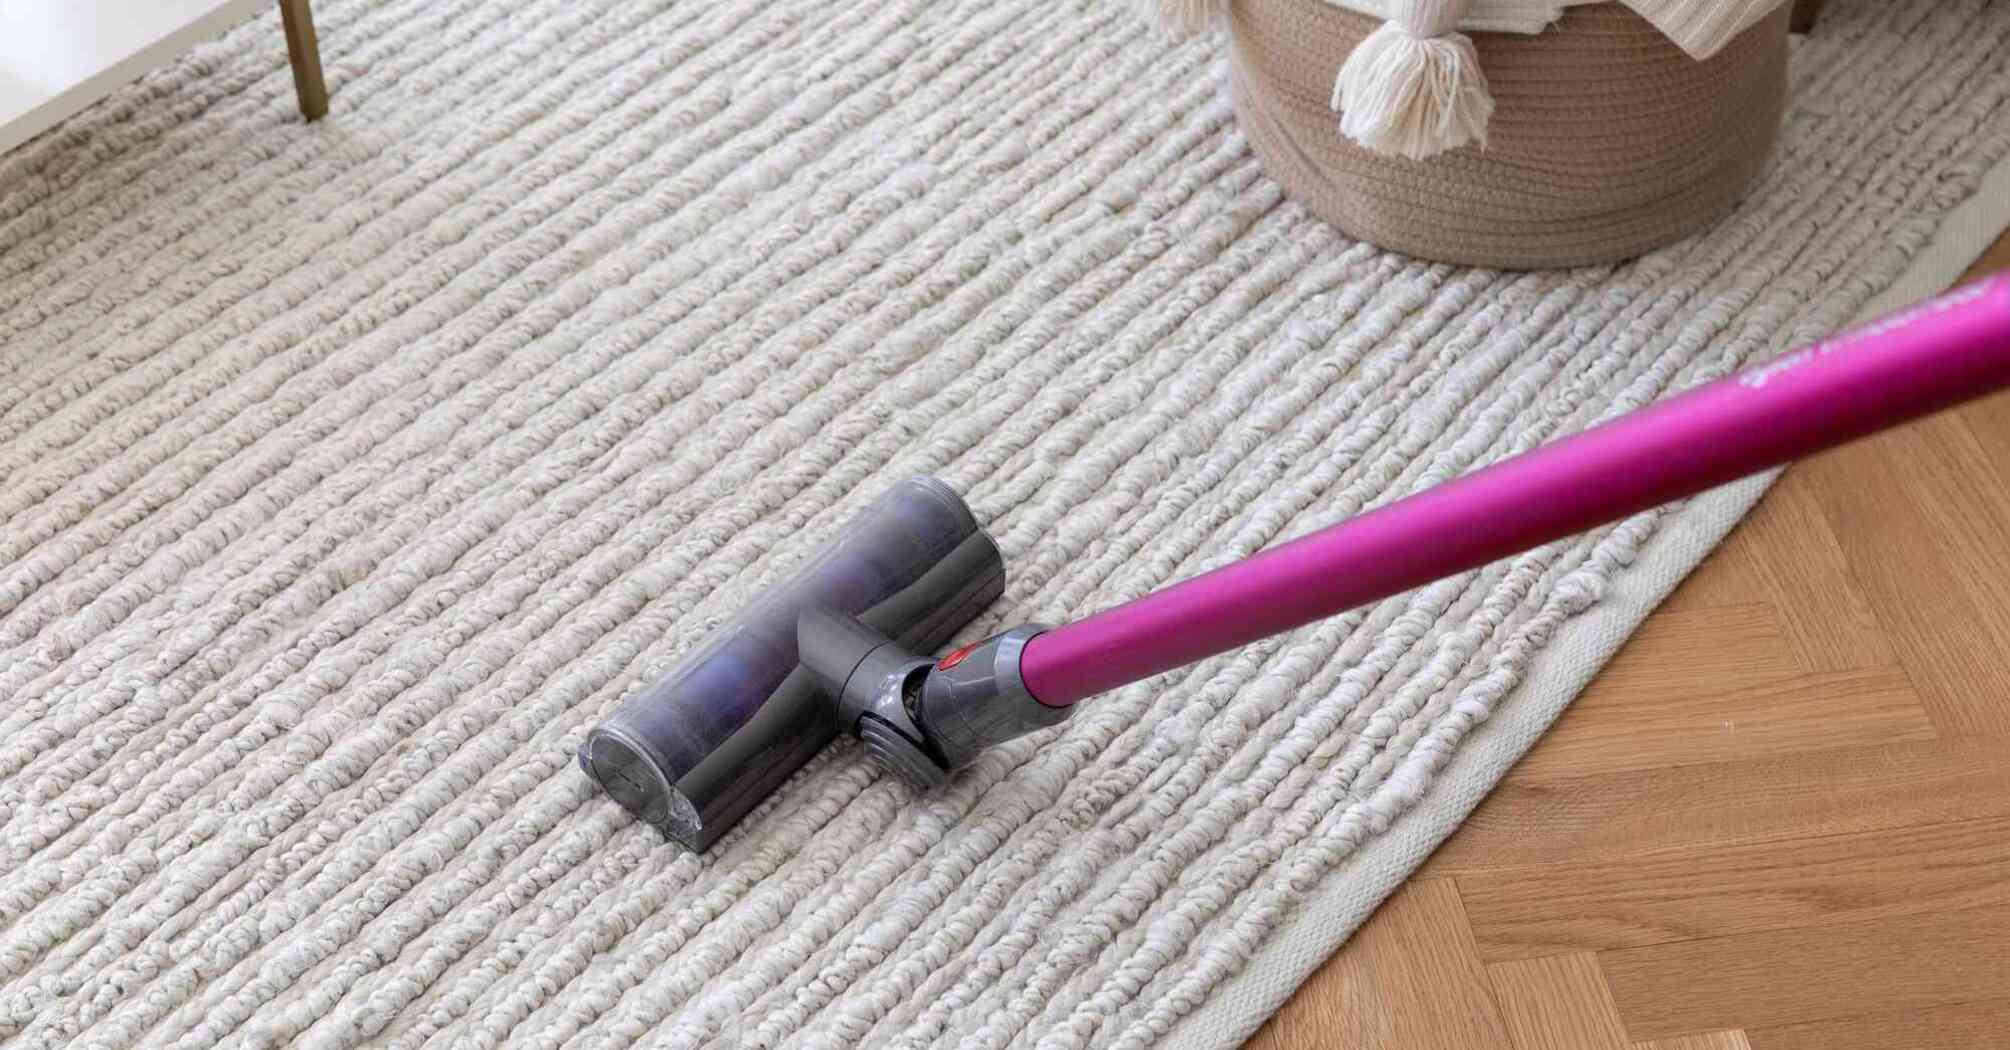 How often do you need to wash the floor and vacuum